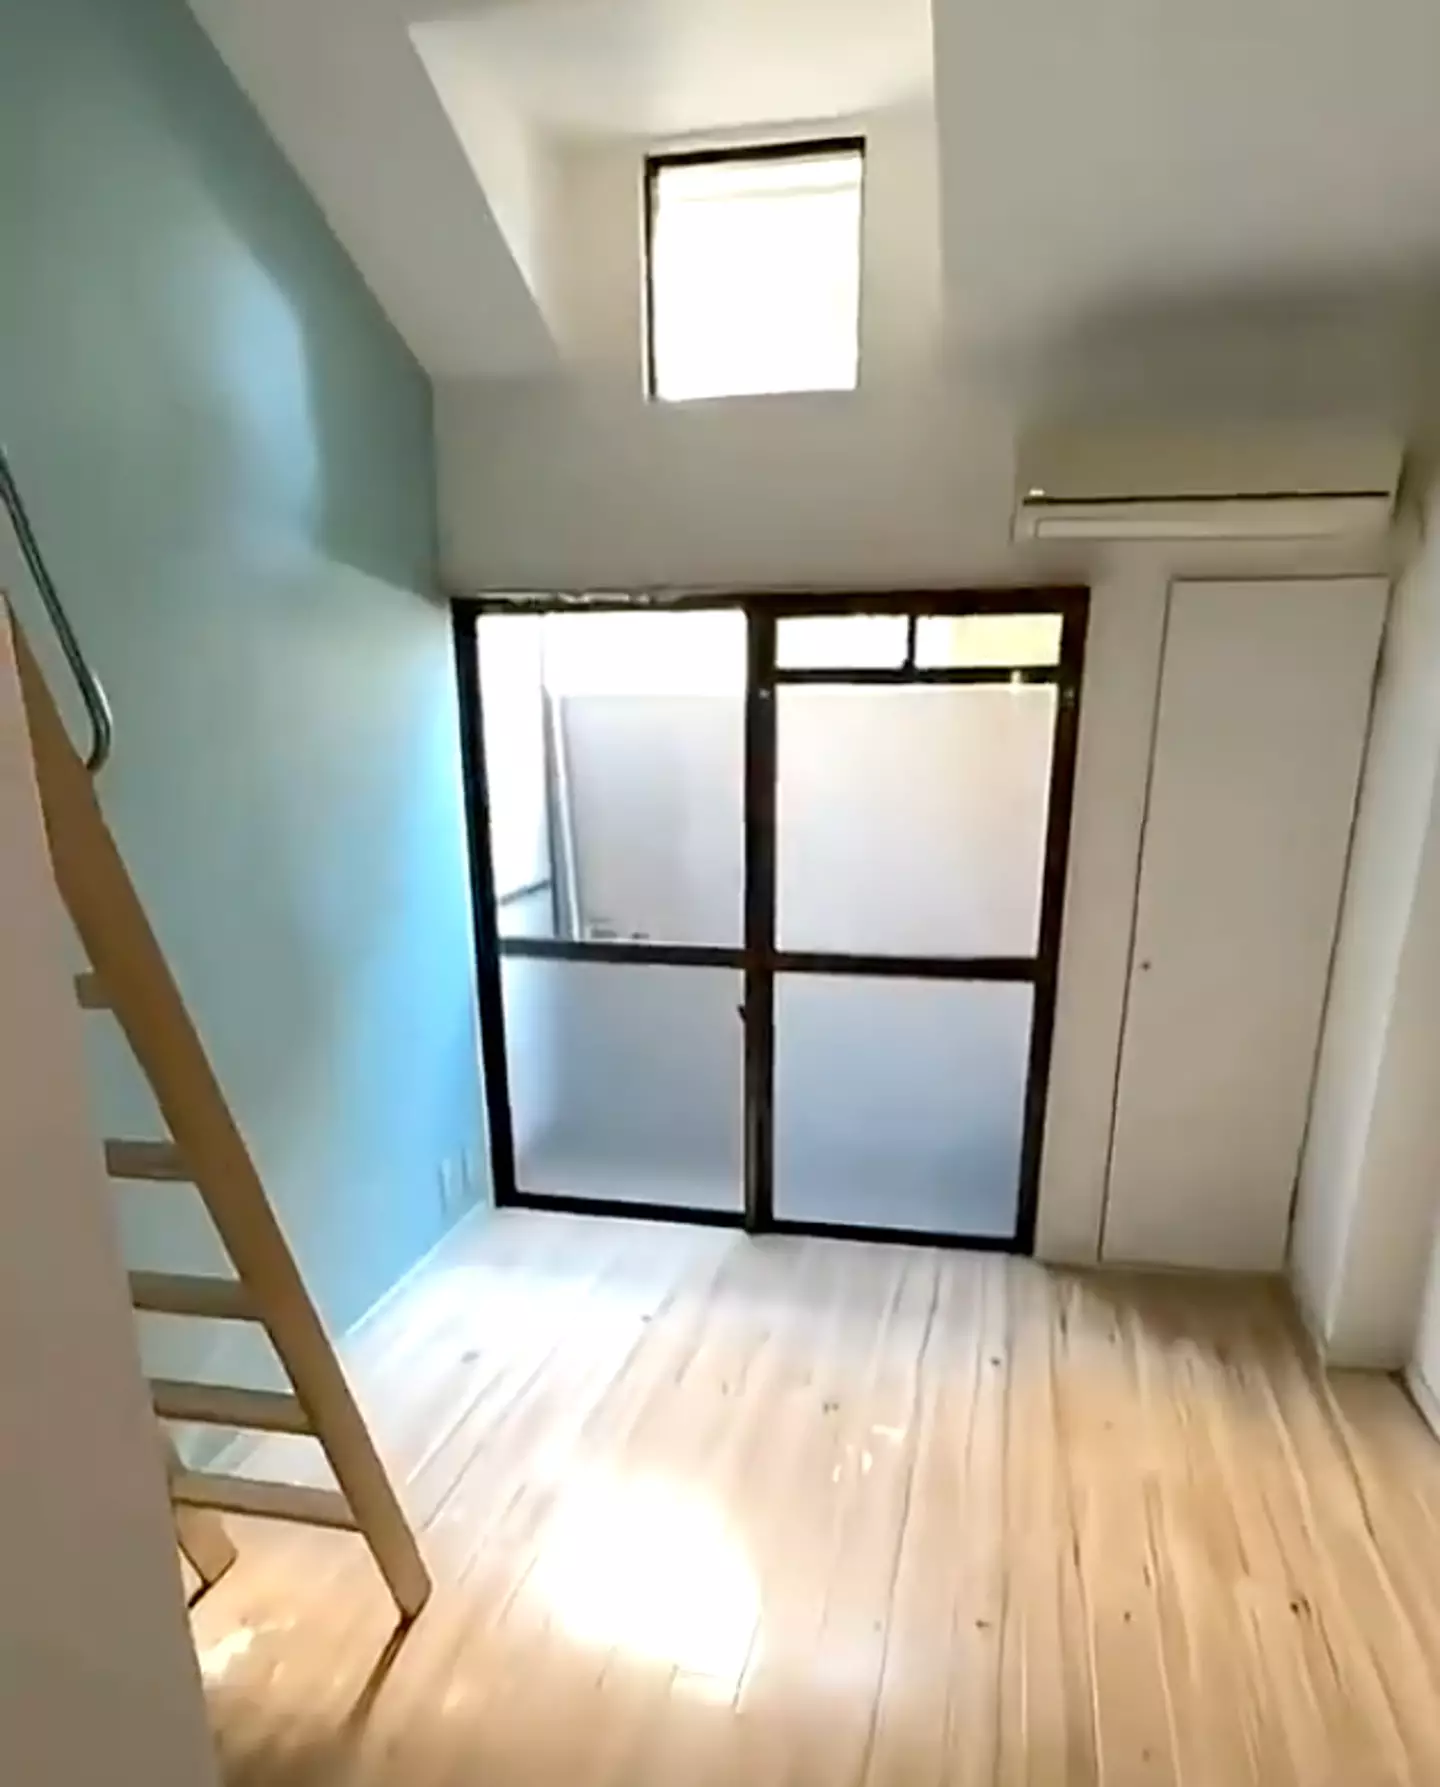 The clip has been viewed more than 920,000 times and gives a tour of an apartment in Tokyo.